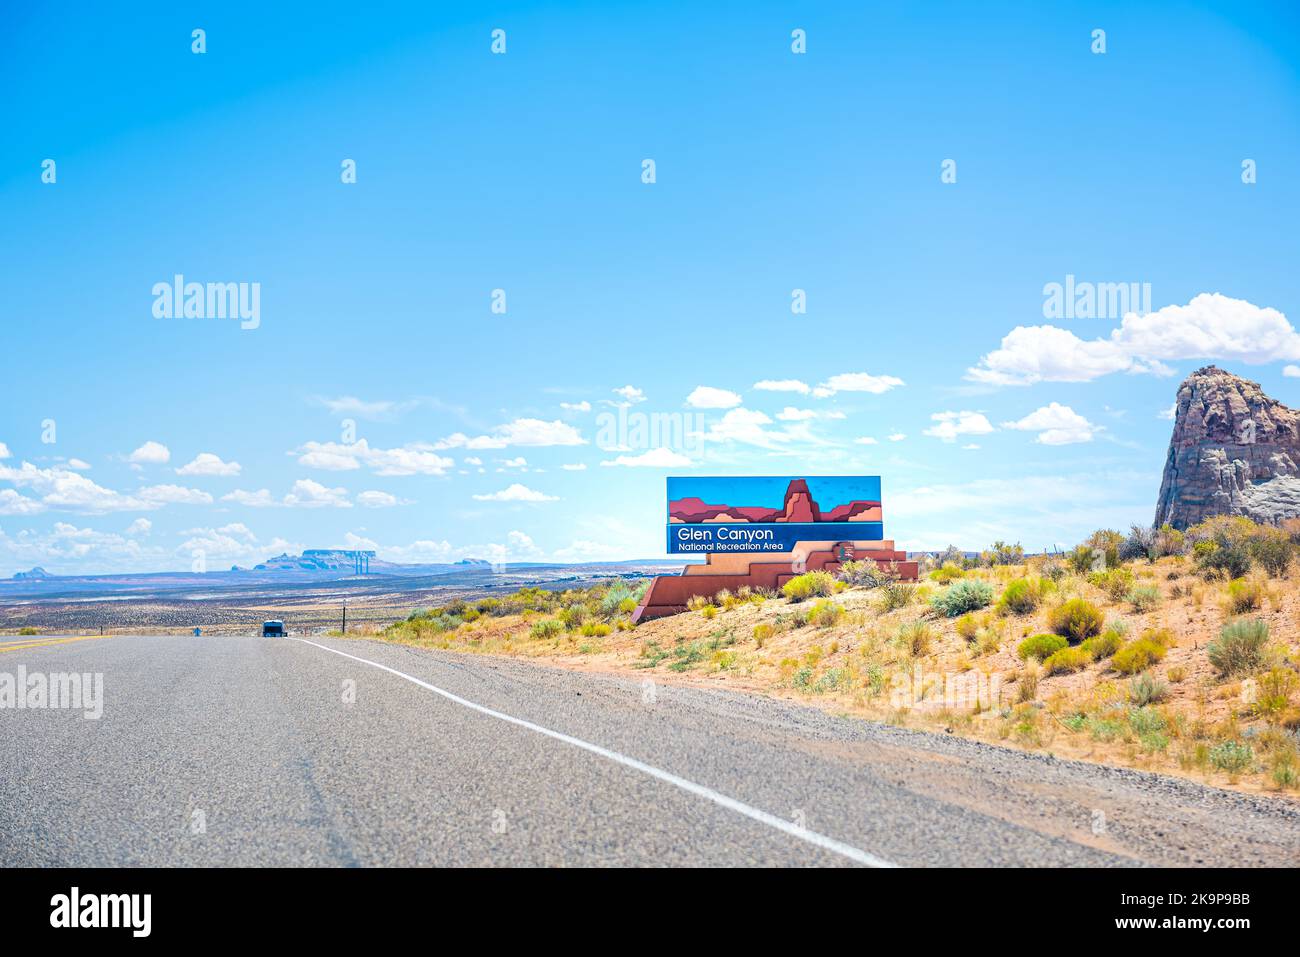 Kanab, USA - August 8, 2019: Road sign for Utah Glen Canyon Recreation area, National park service by desert summer landscape by interstate highway 89 Stock Photo